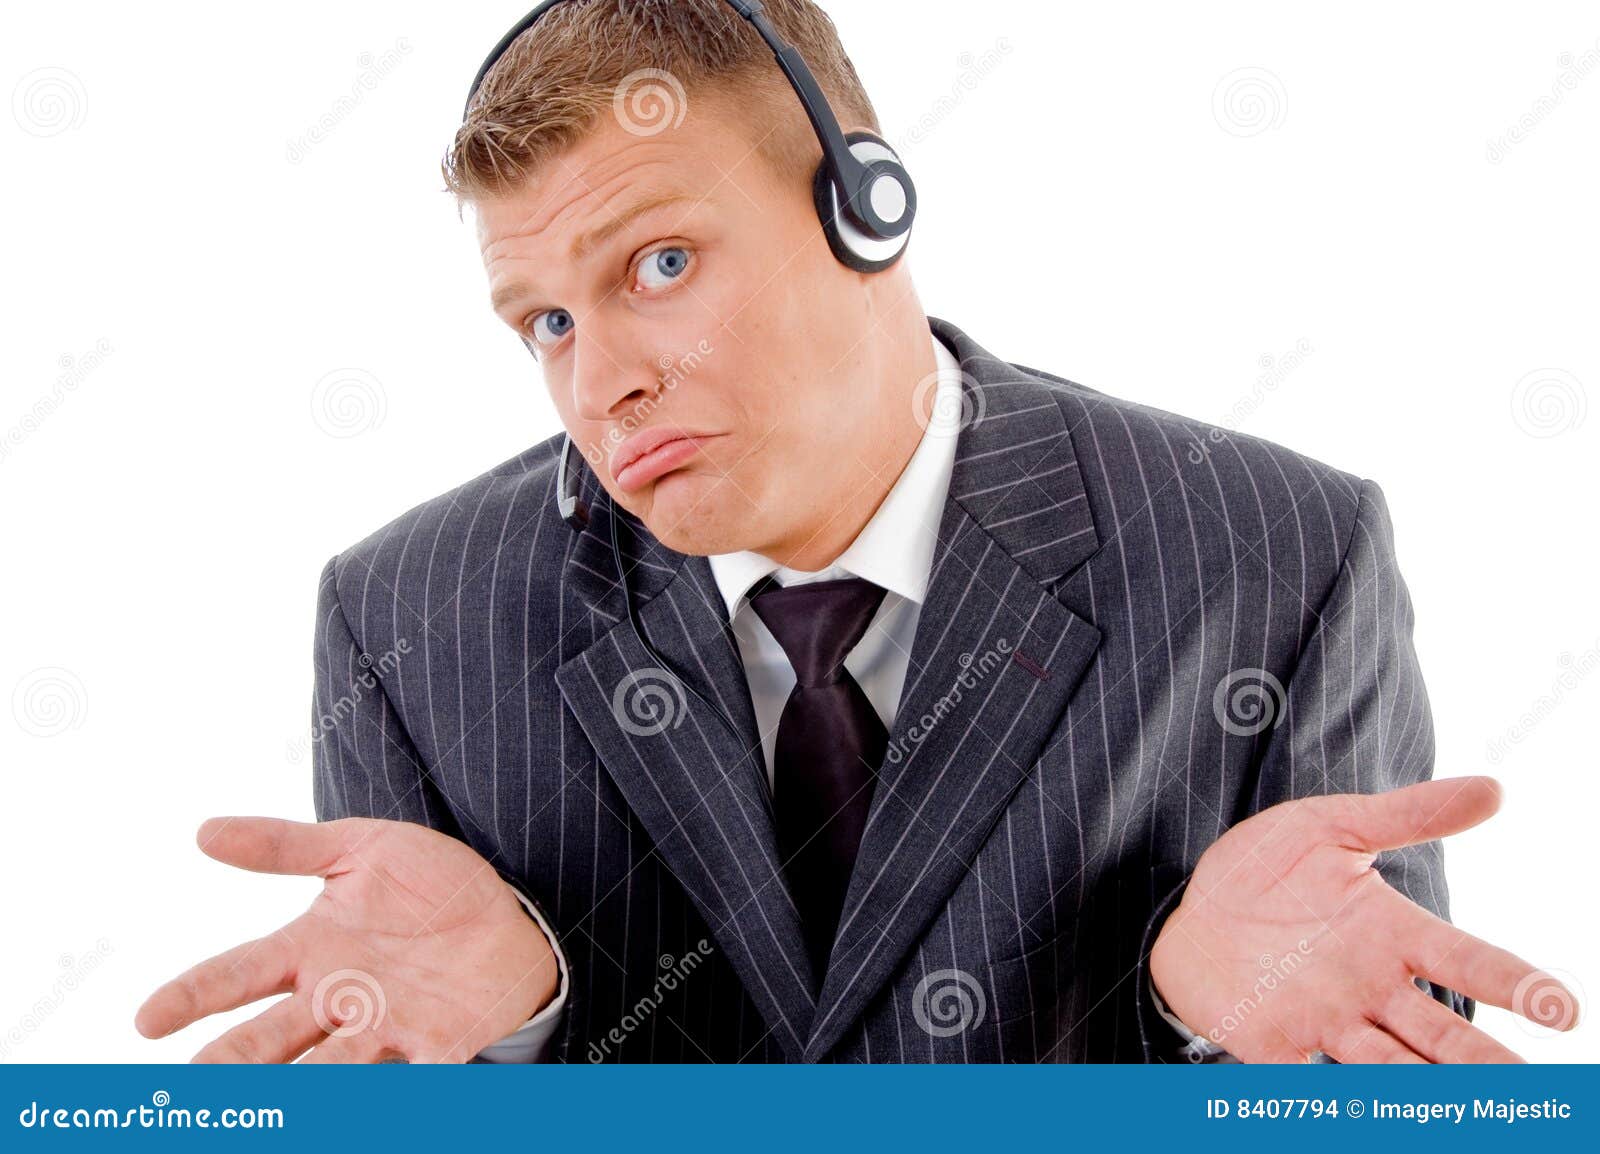 Confused Businessman Posing With Headset Stock Photo - Image: 8407794